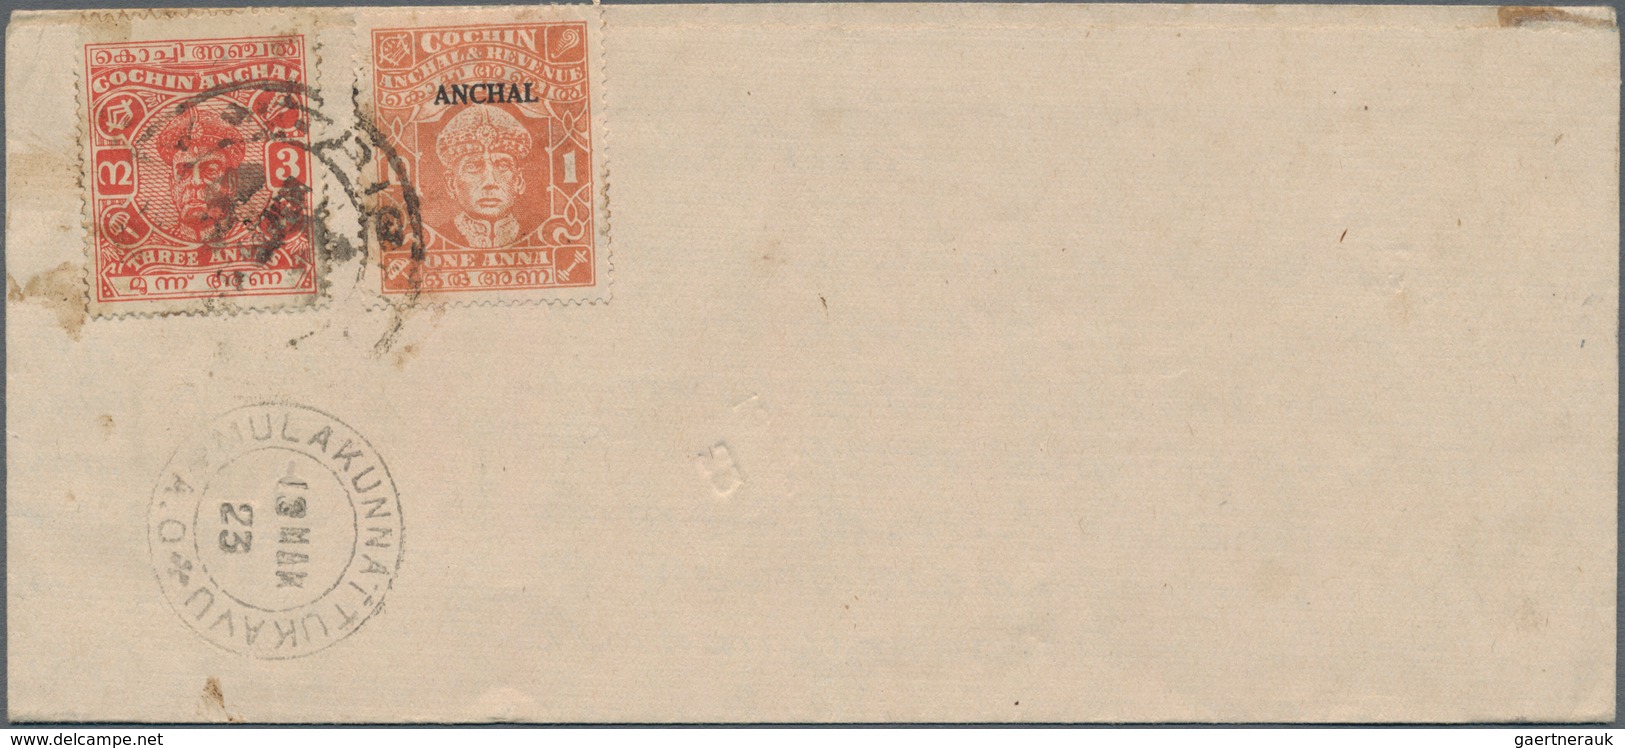 Indien - Feudalstaaten - Cochin: COCHIN 1894-1949: About 80 covers and postcards plus 16 uprated pos